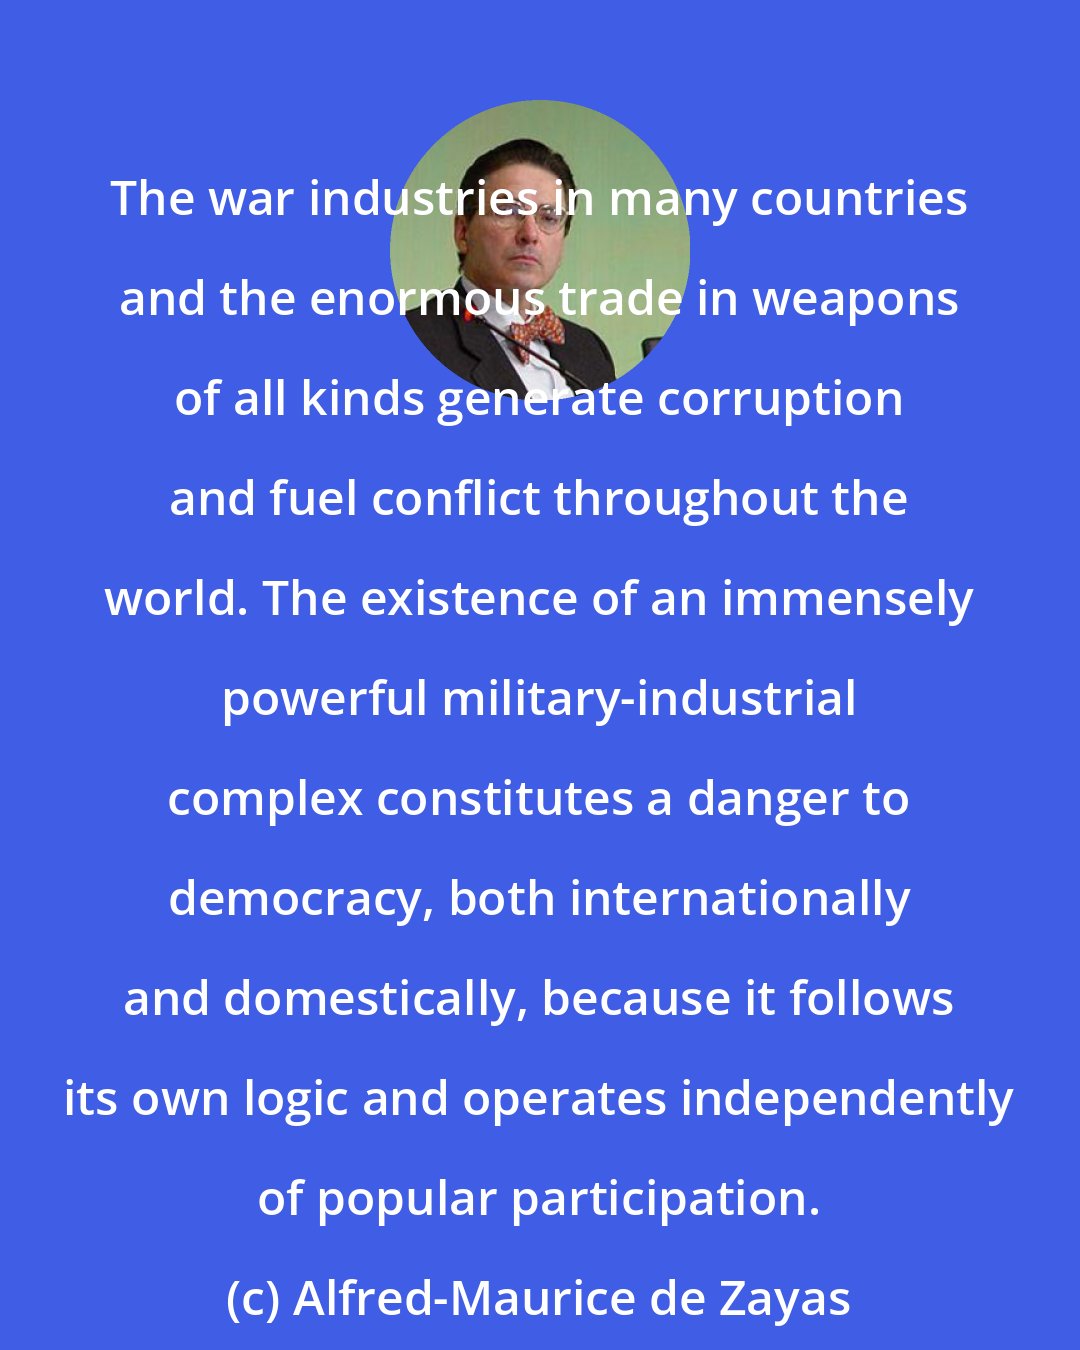 Alfred-Maurice de Zayas: The war industries in many countries and the enormous trade in weapons of all kinds generate corruption and fuel conflict throughout the world. The existence of an immensely powerful military-industrial complex constitutes a danger to democracy, both internationally and domestically, because it follows its own logic and operates independently of popular participation.